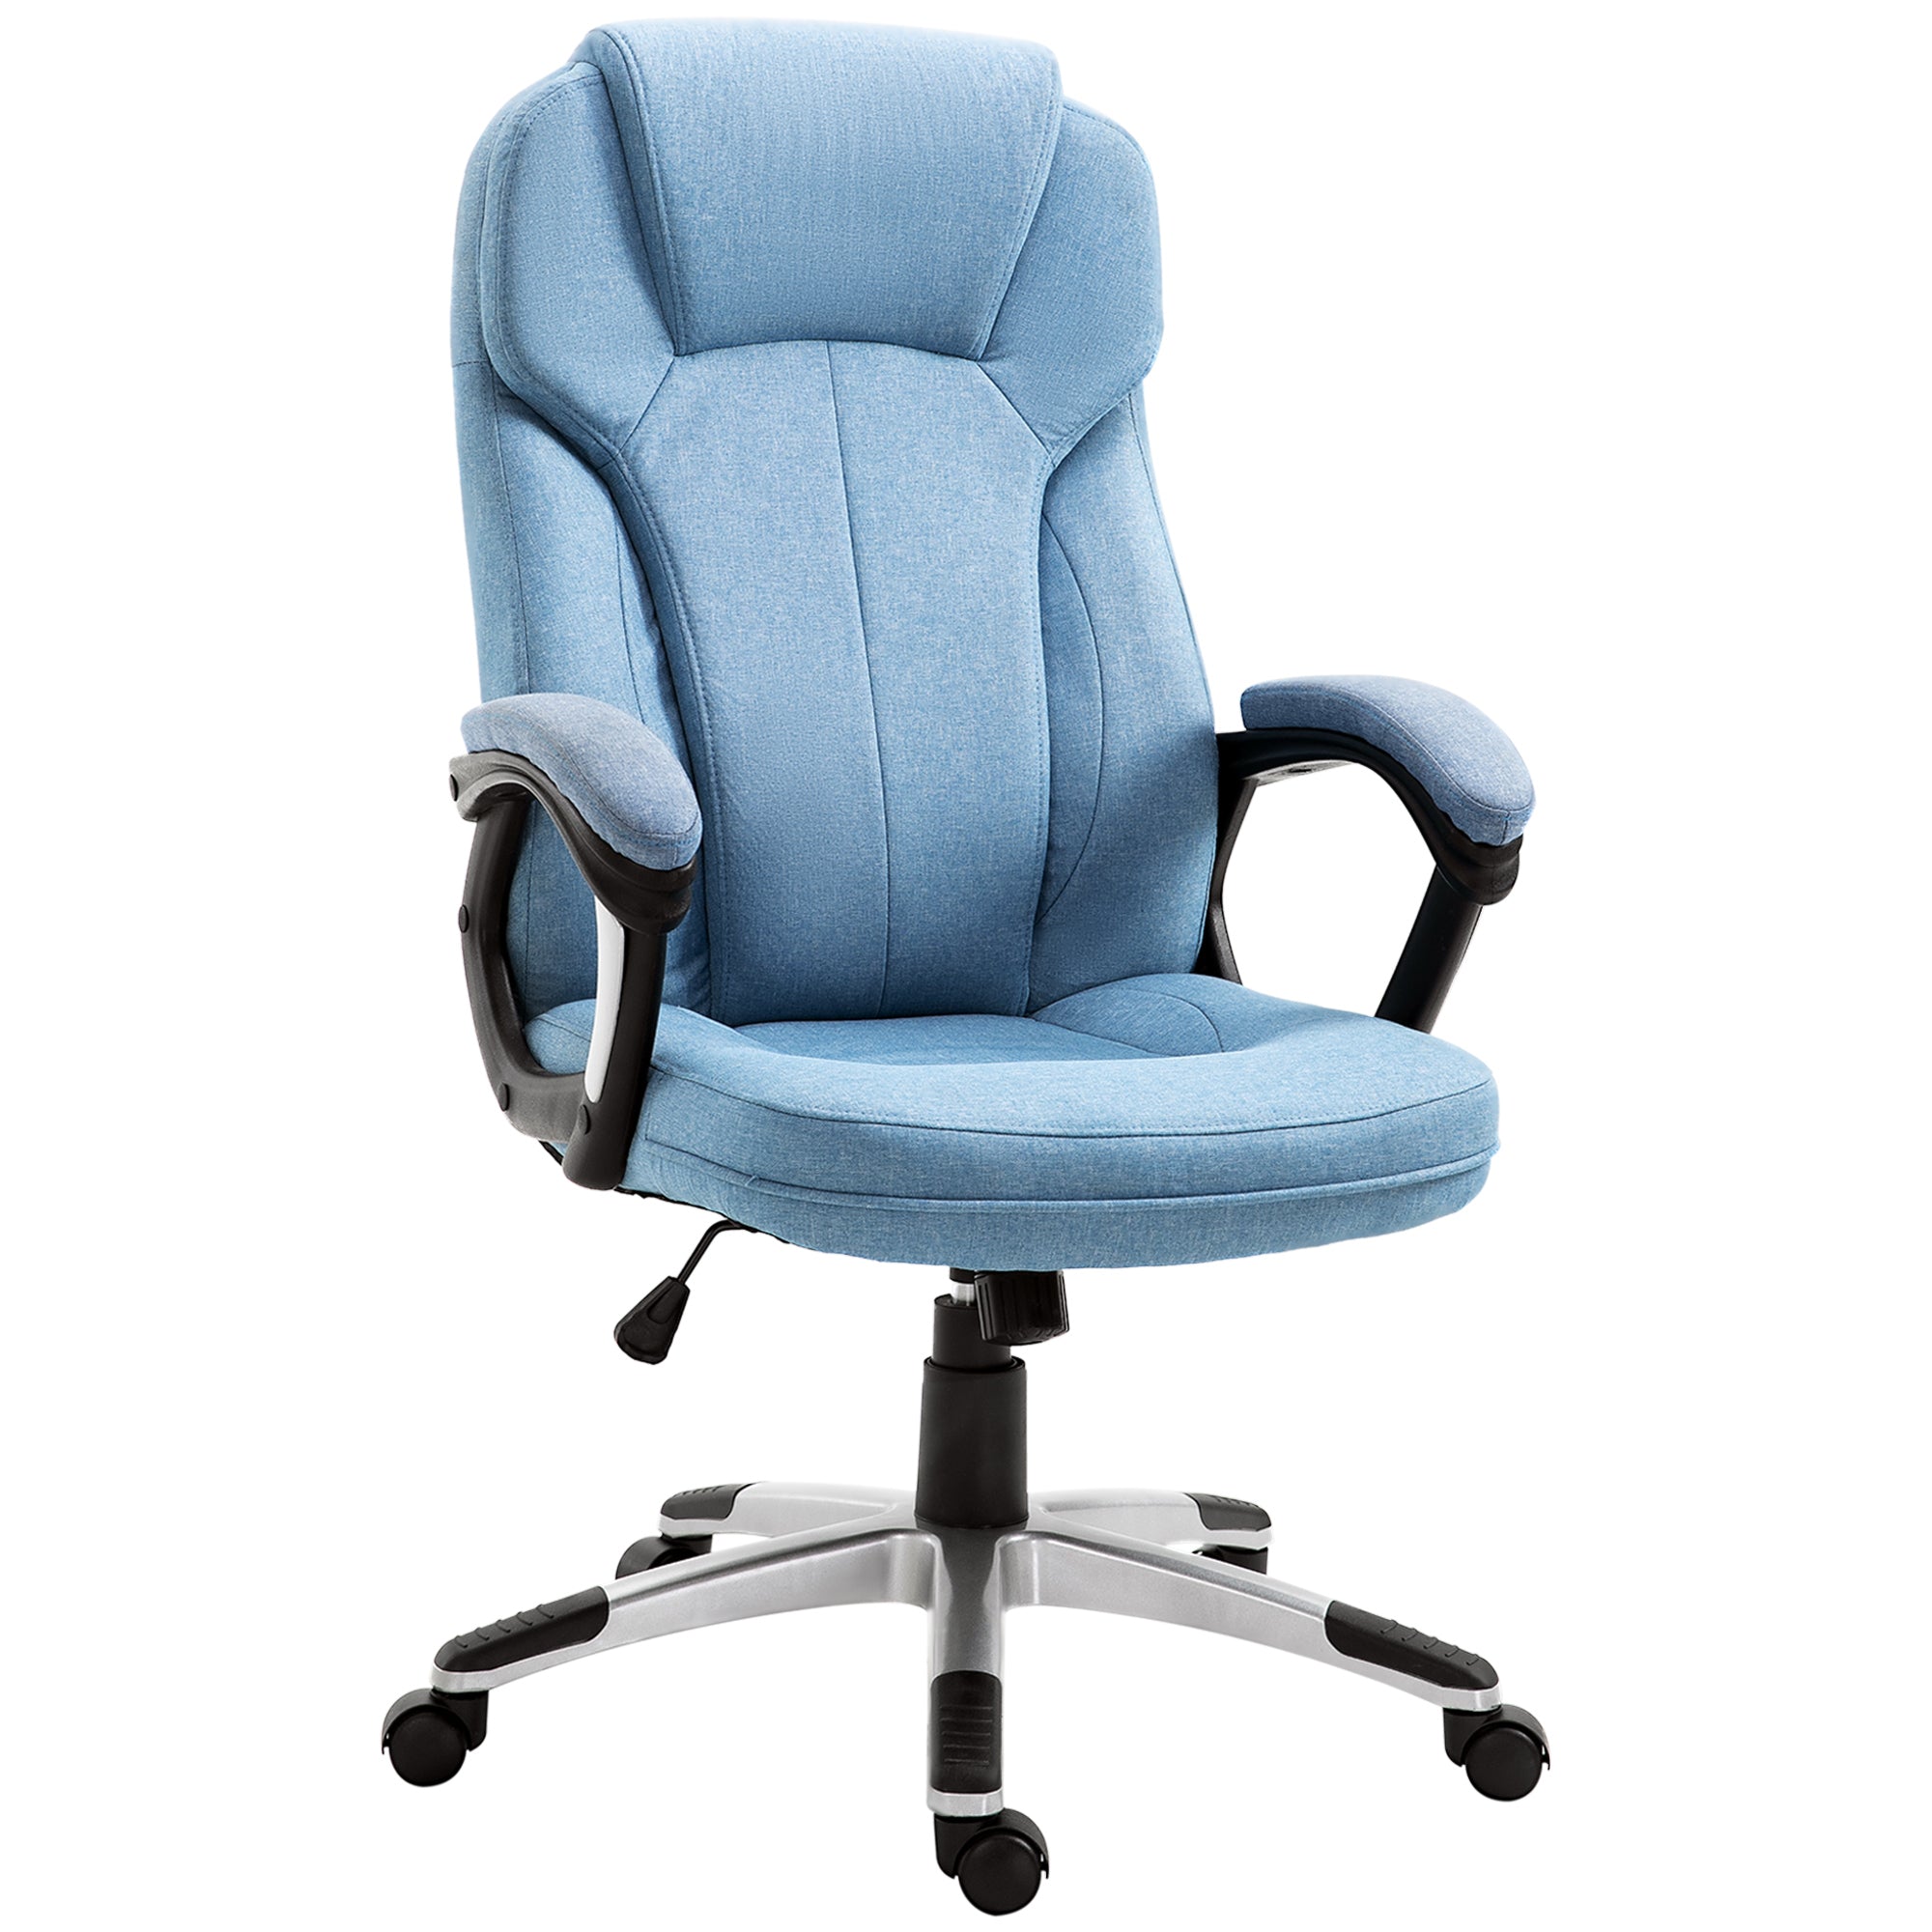 Vinsetto Linen Executive Office Chair Height Adjustable Swivel Chair - Blue  | TJ Hughes